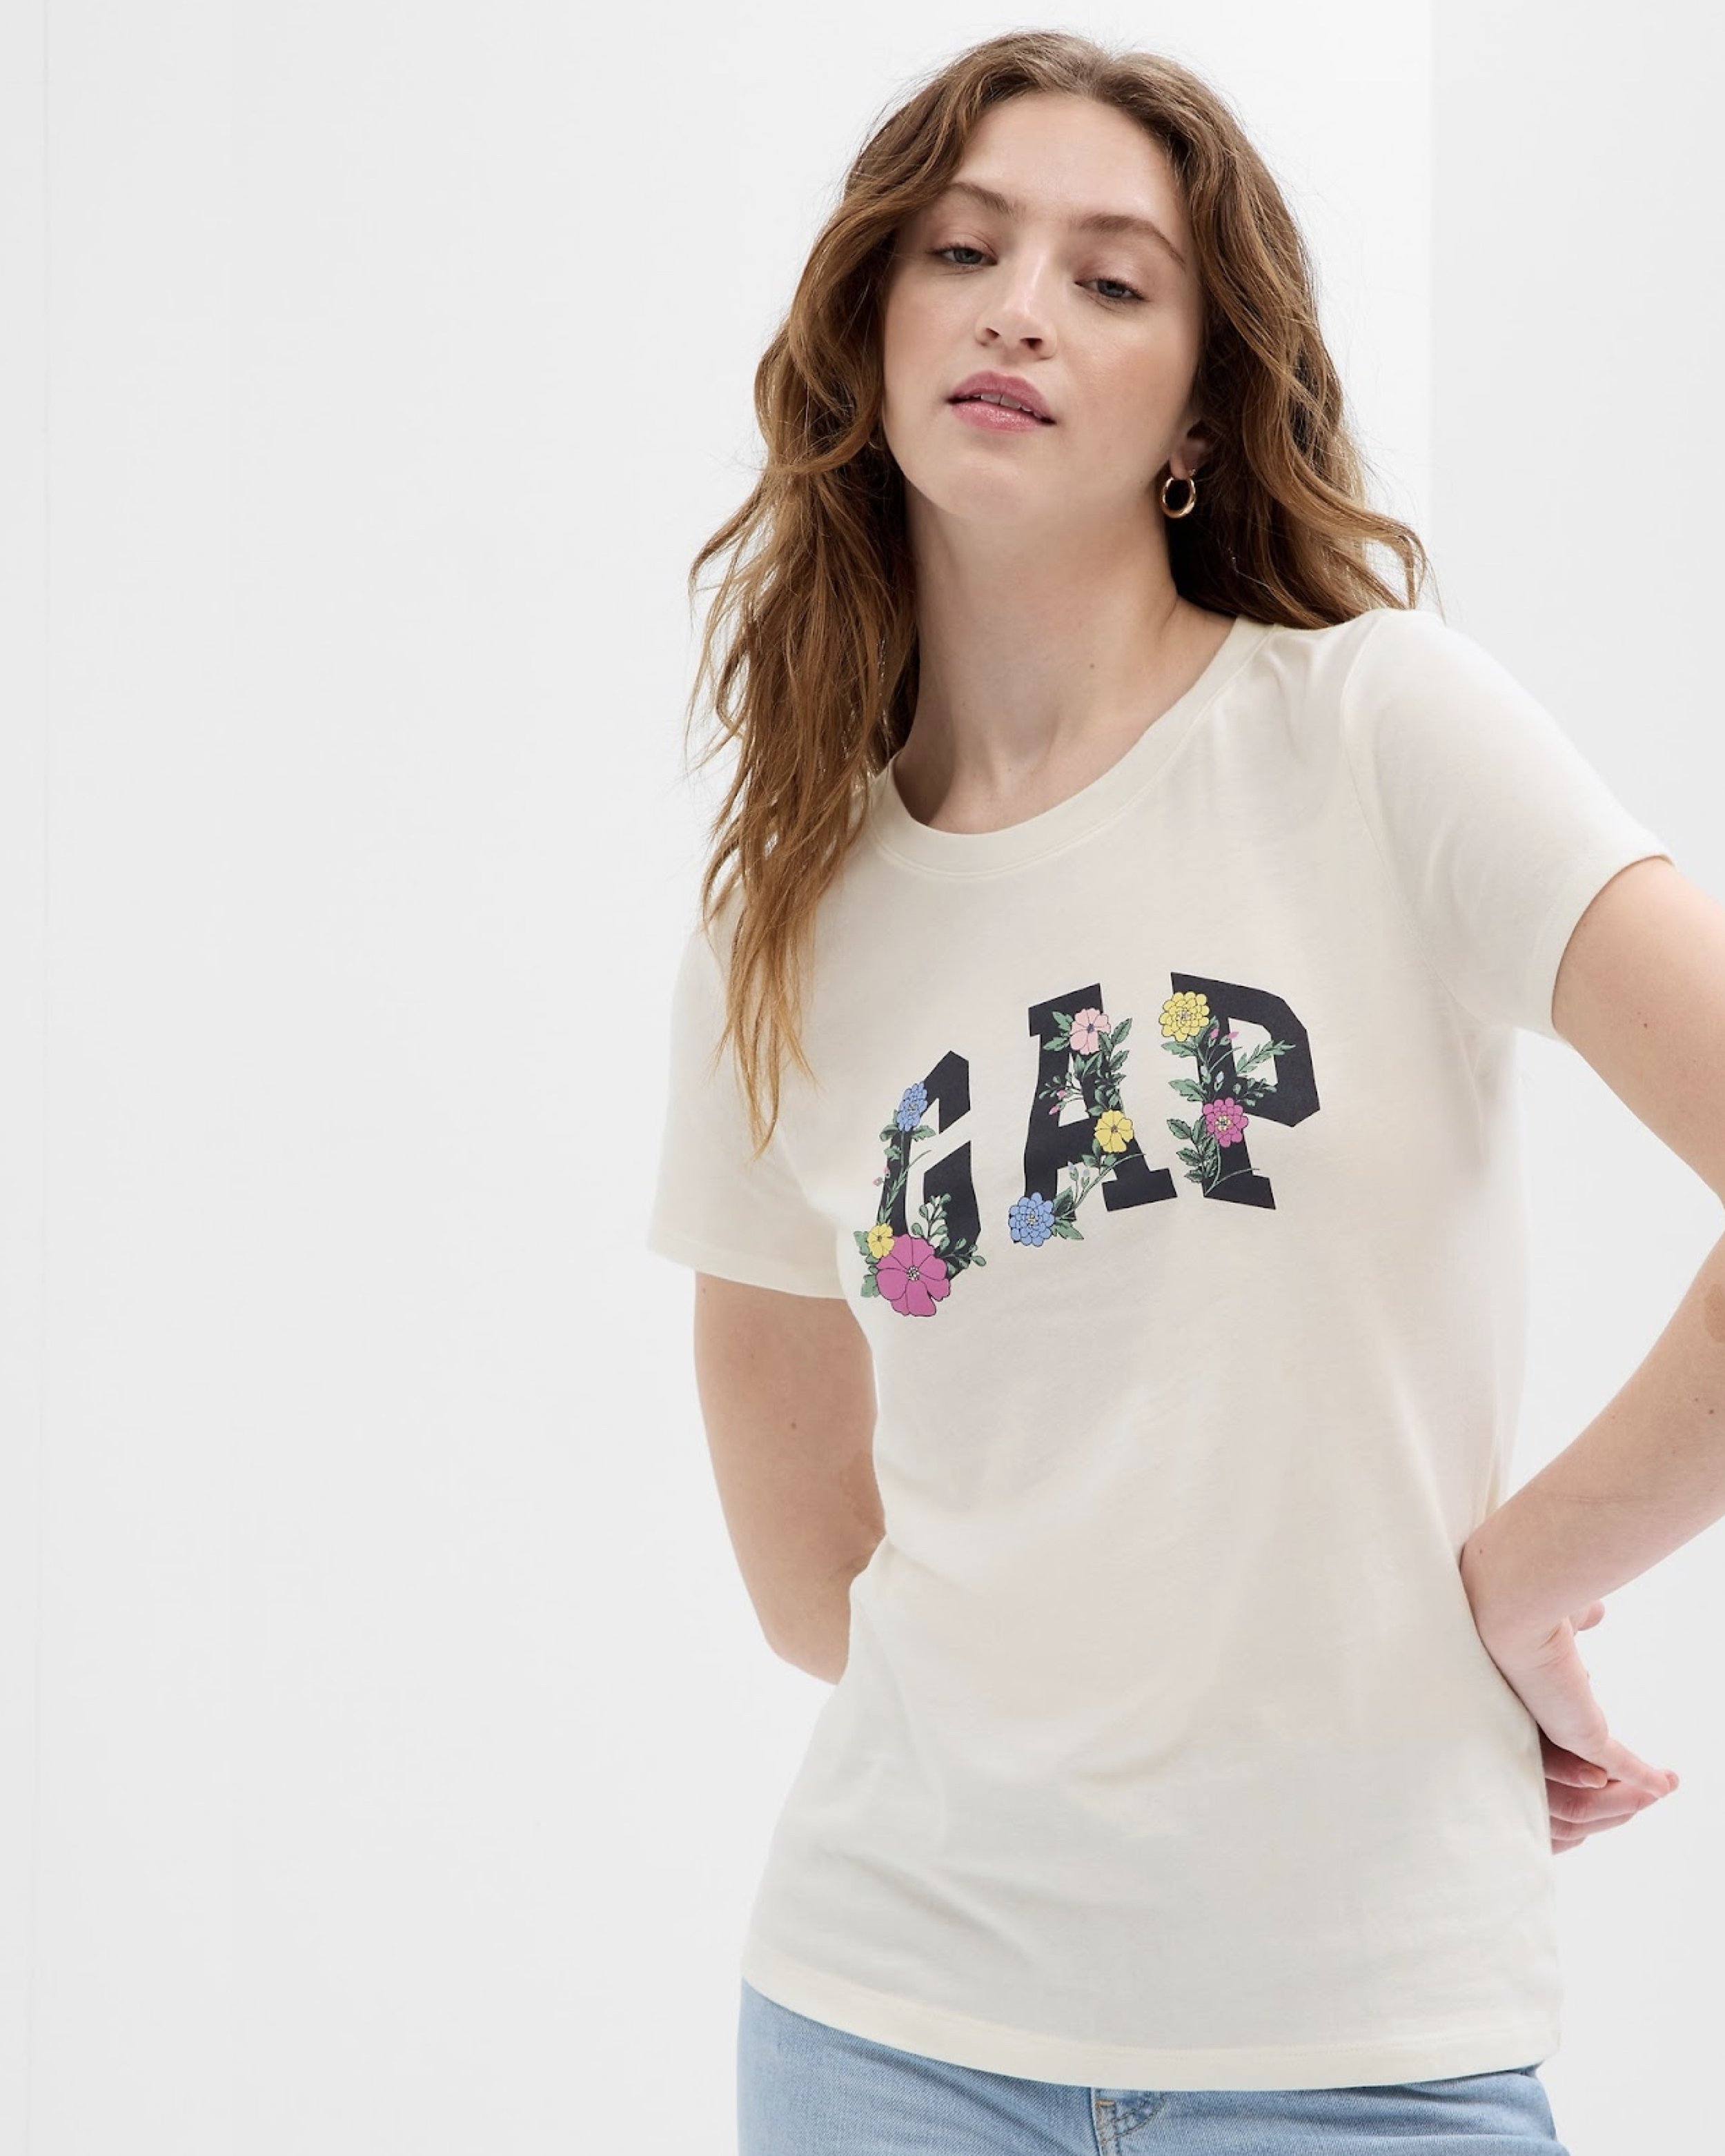 Gap Blooms In Color, Together — SSI Life